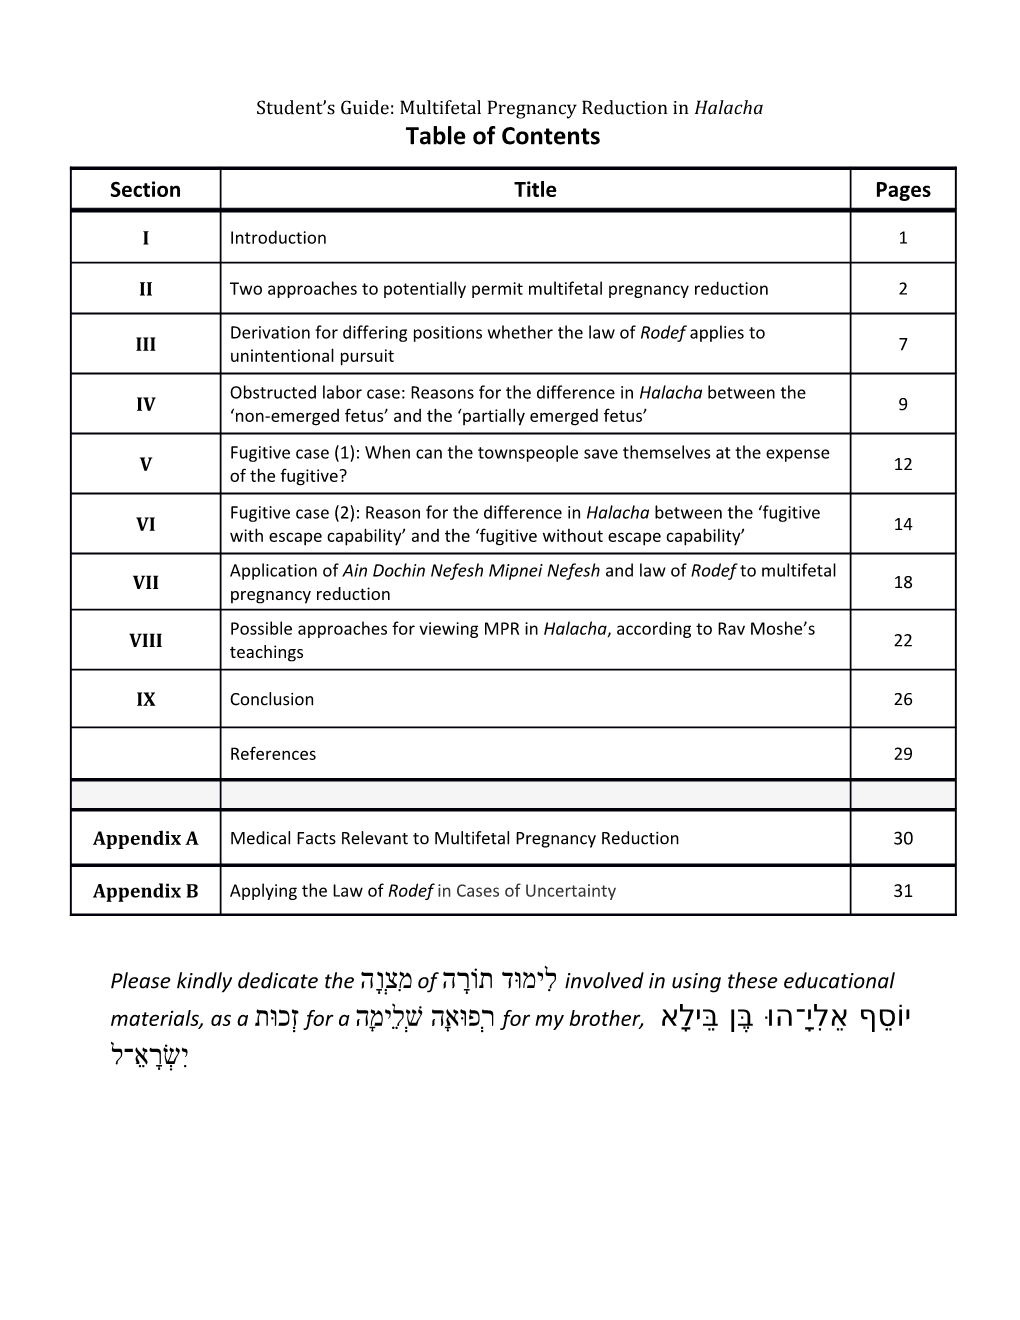 Student S Guide: Multifetal Pregnancy Reduction in Halacha